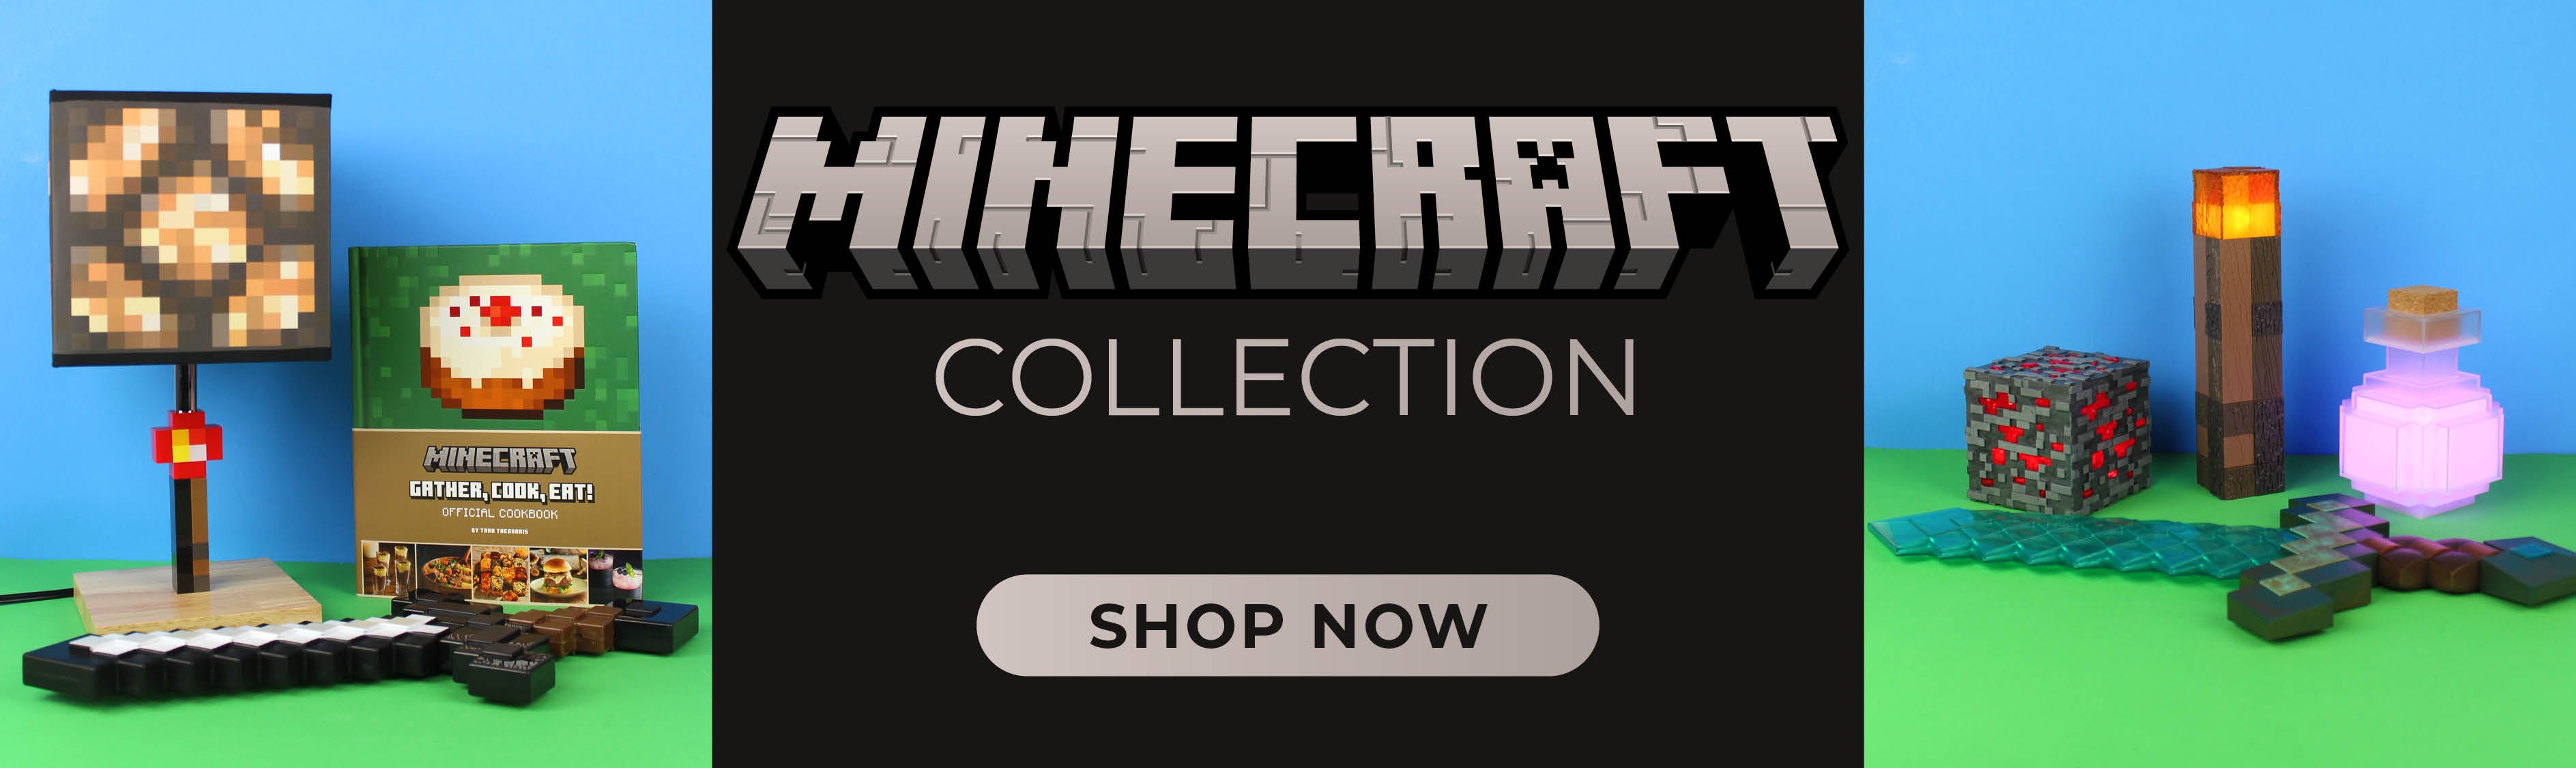 Minecraft Collection - Shop Now!